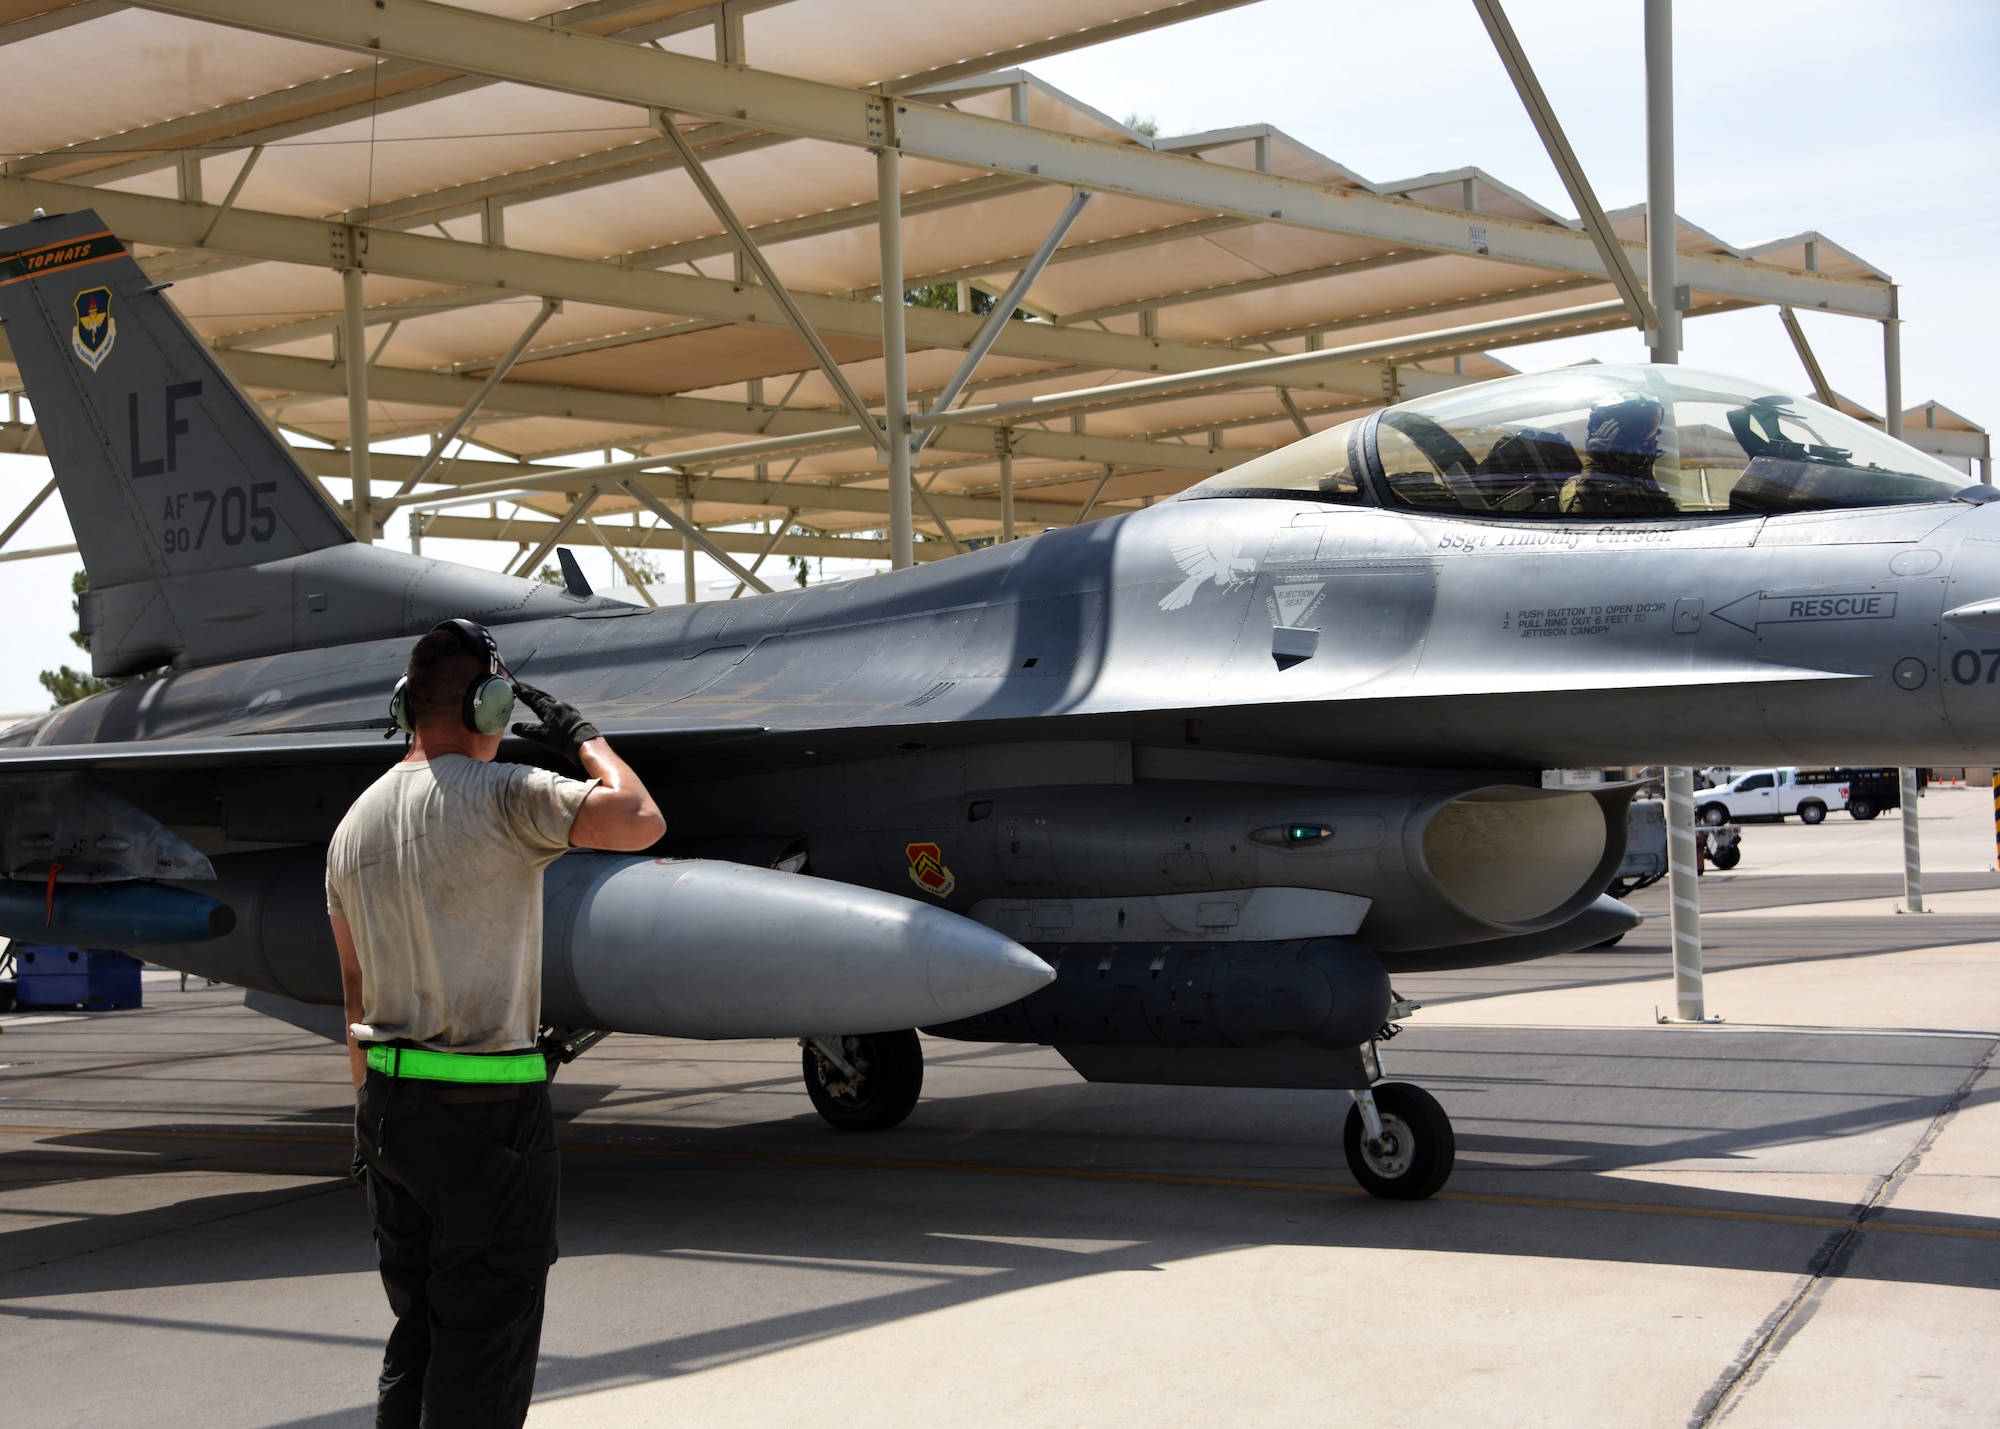 A crew chief from the 310th Aircraft Maintenance Unit, salutes 1st Lt. Robert Lowery, an F-16 Fighting Falcon student pilot, as he taxis to the runway, Aug. 8, 2018 at Luke Air Force Base, Ariz.